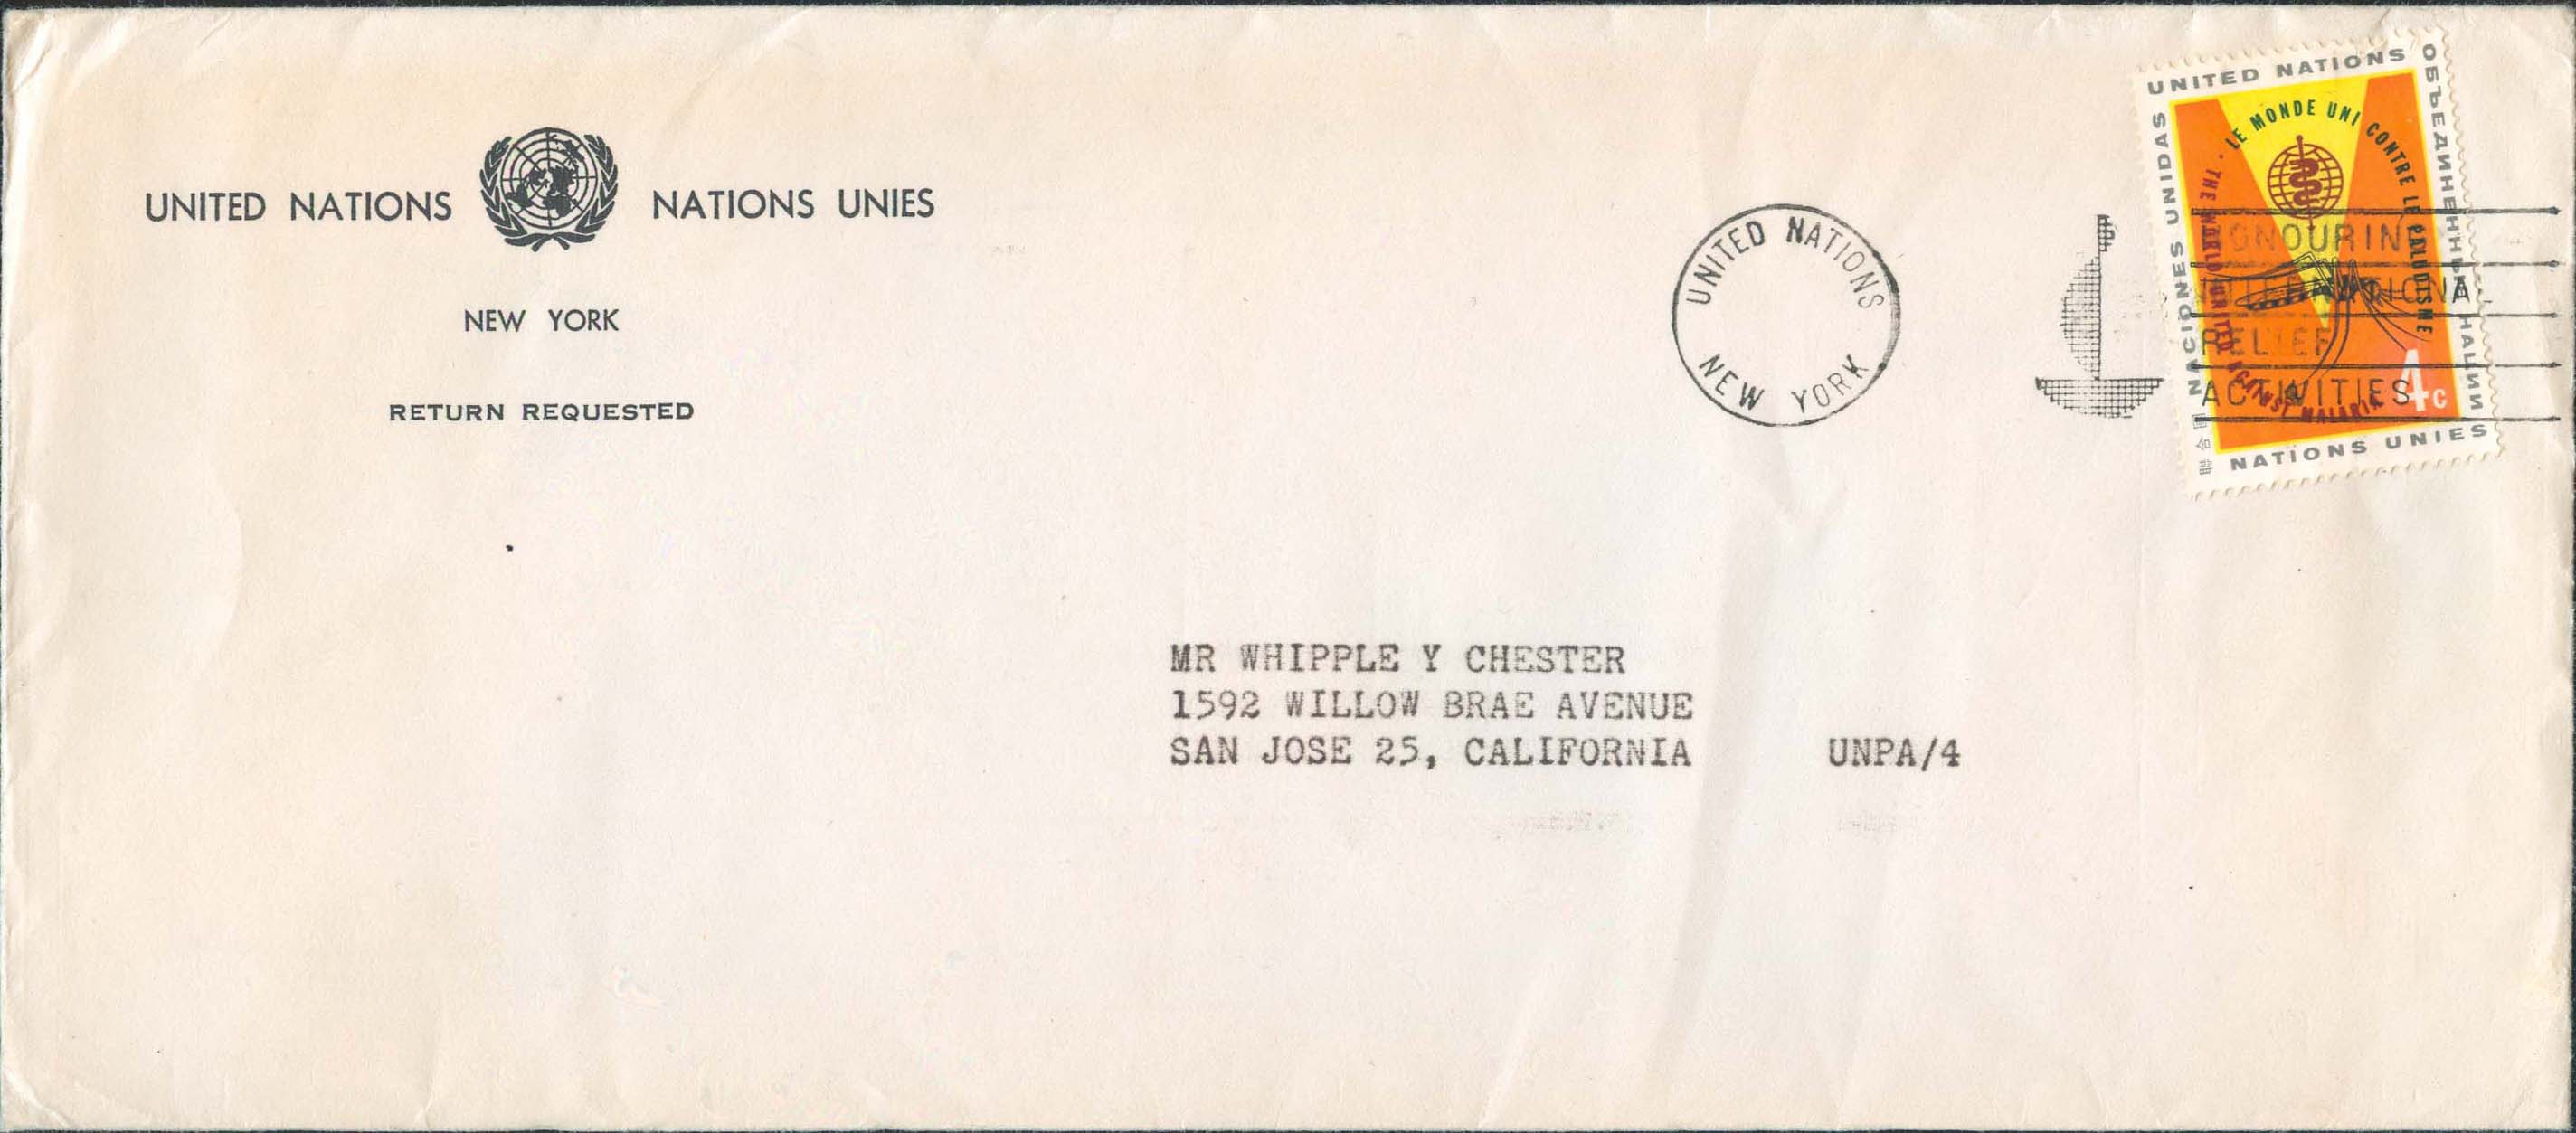 3rd Class mailing (contents dated September 15, 1963) with United Nations Scott 102